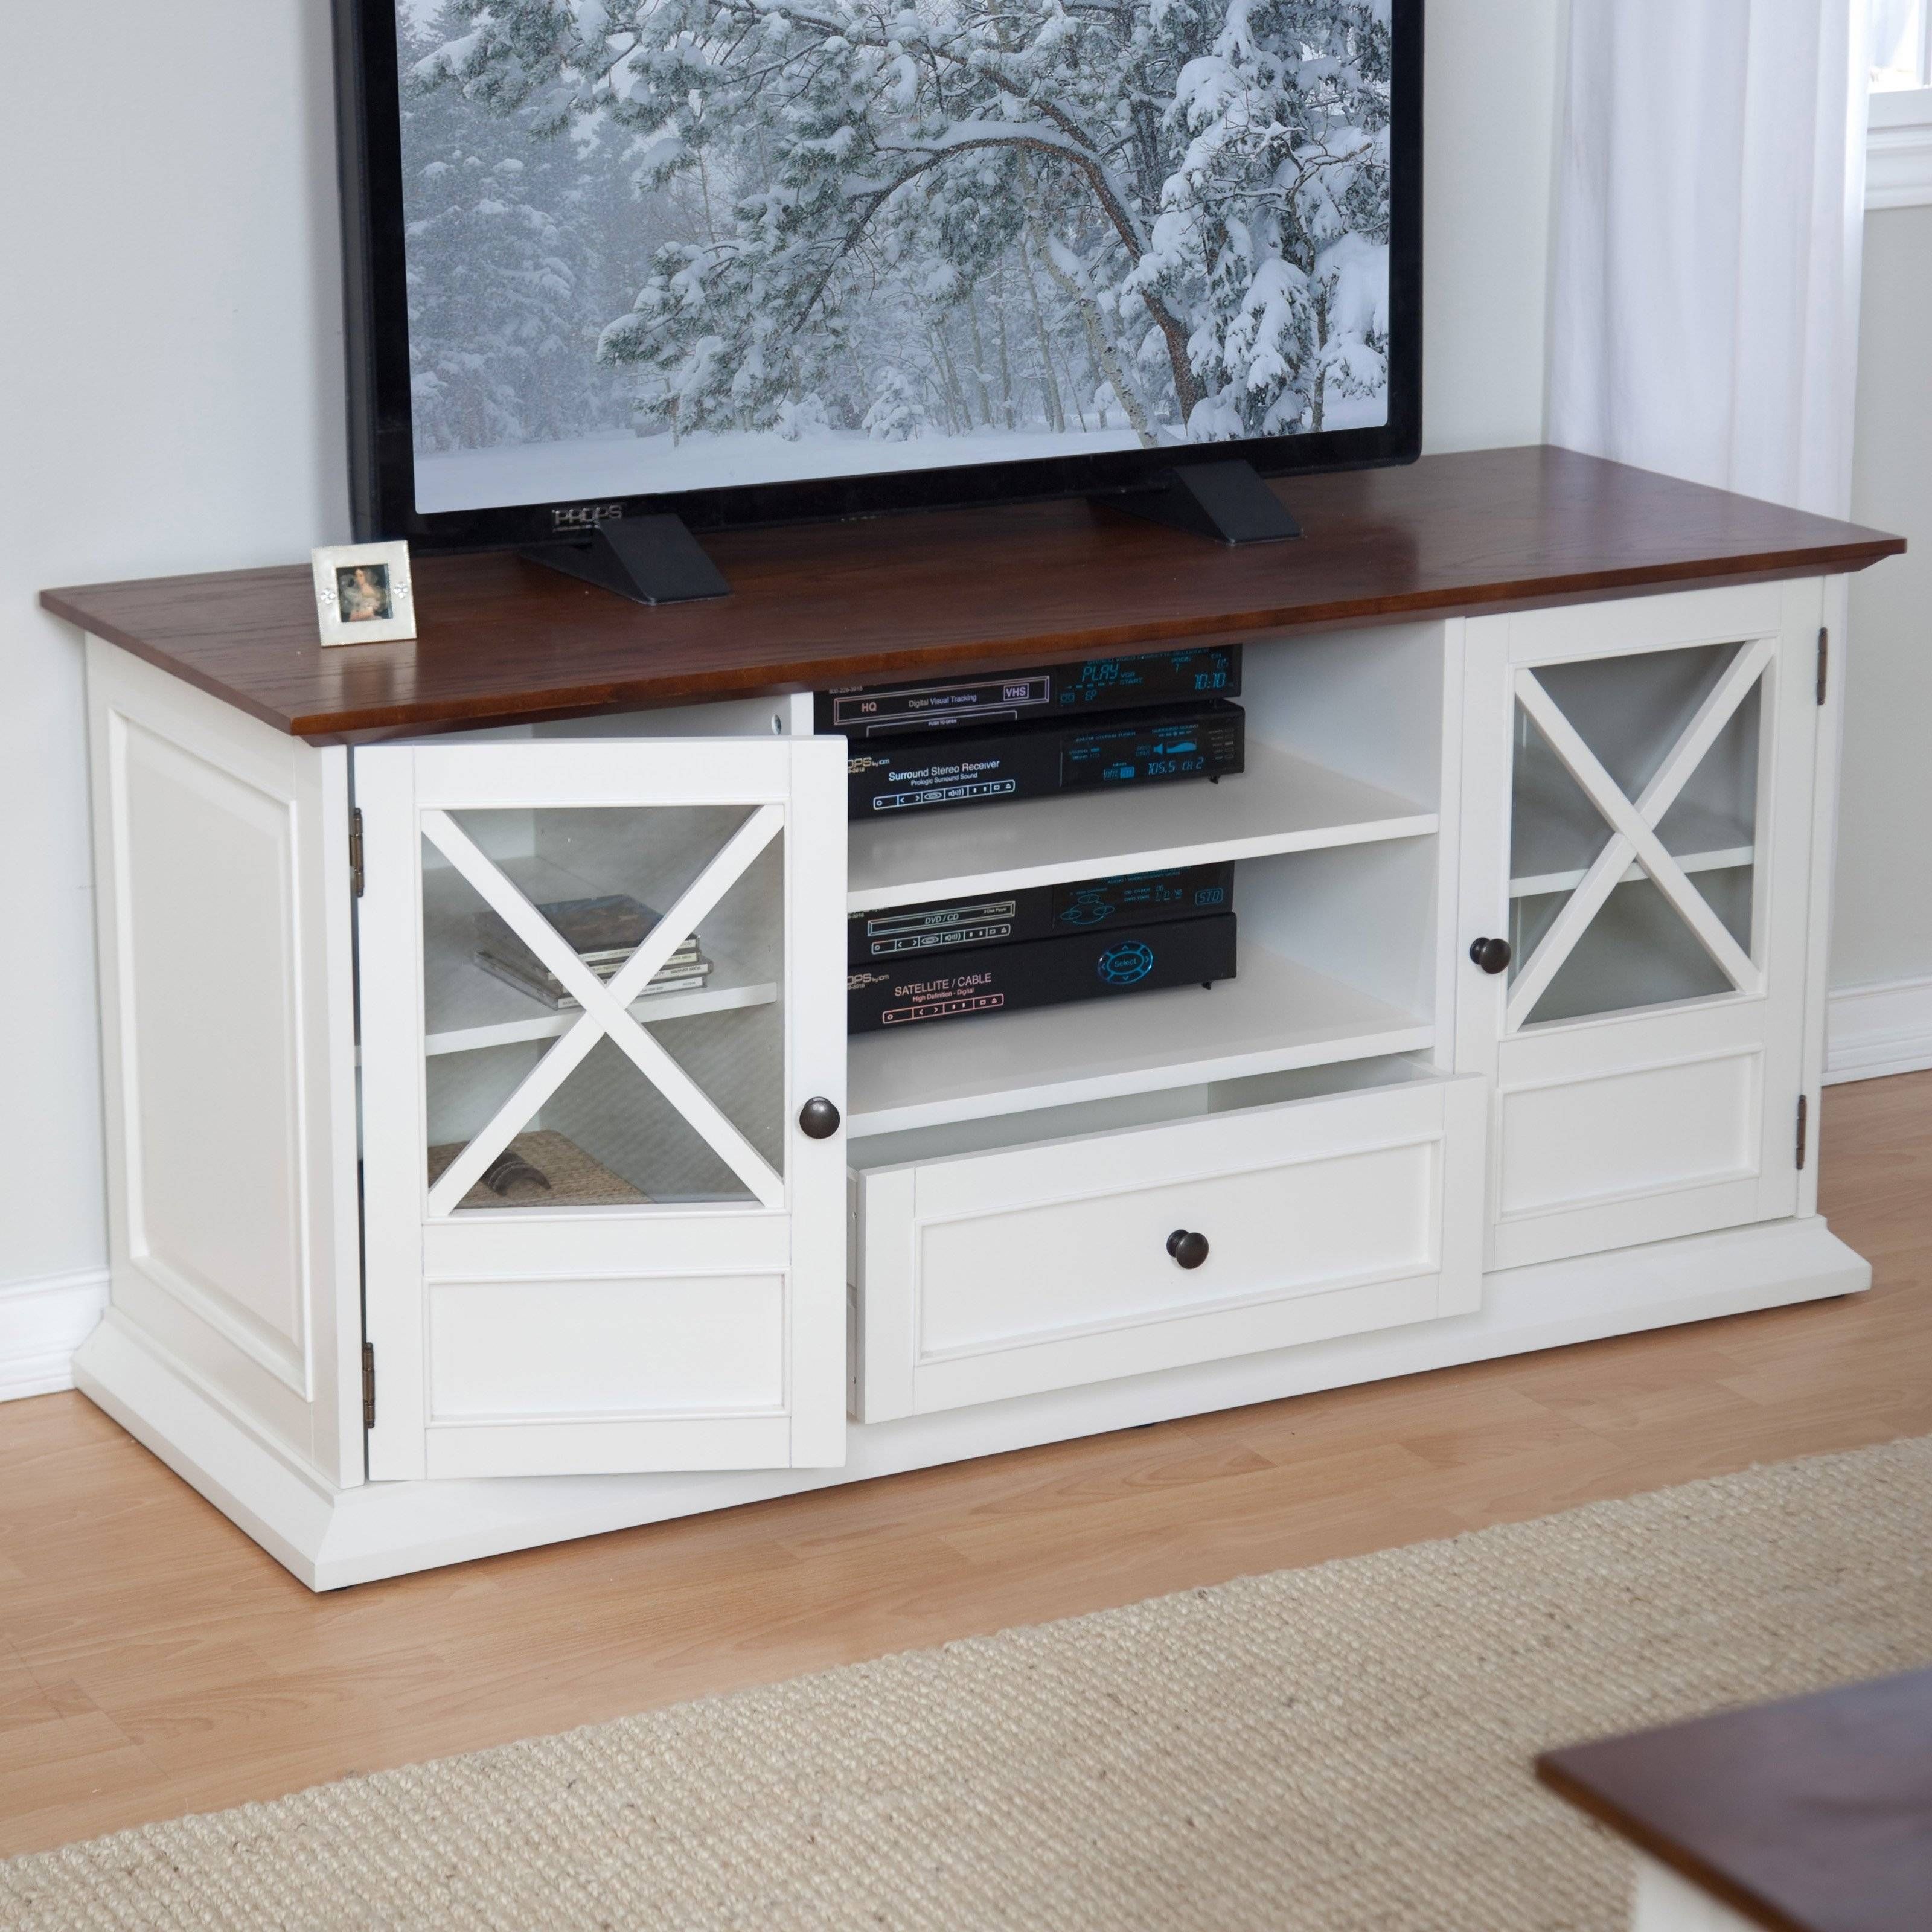 Belham Living Hampton Tv Stand – White/oak | Hayneedle Intended For White Wood Tv Stands (View 2 of 15)